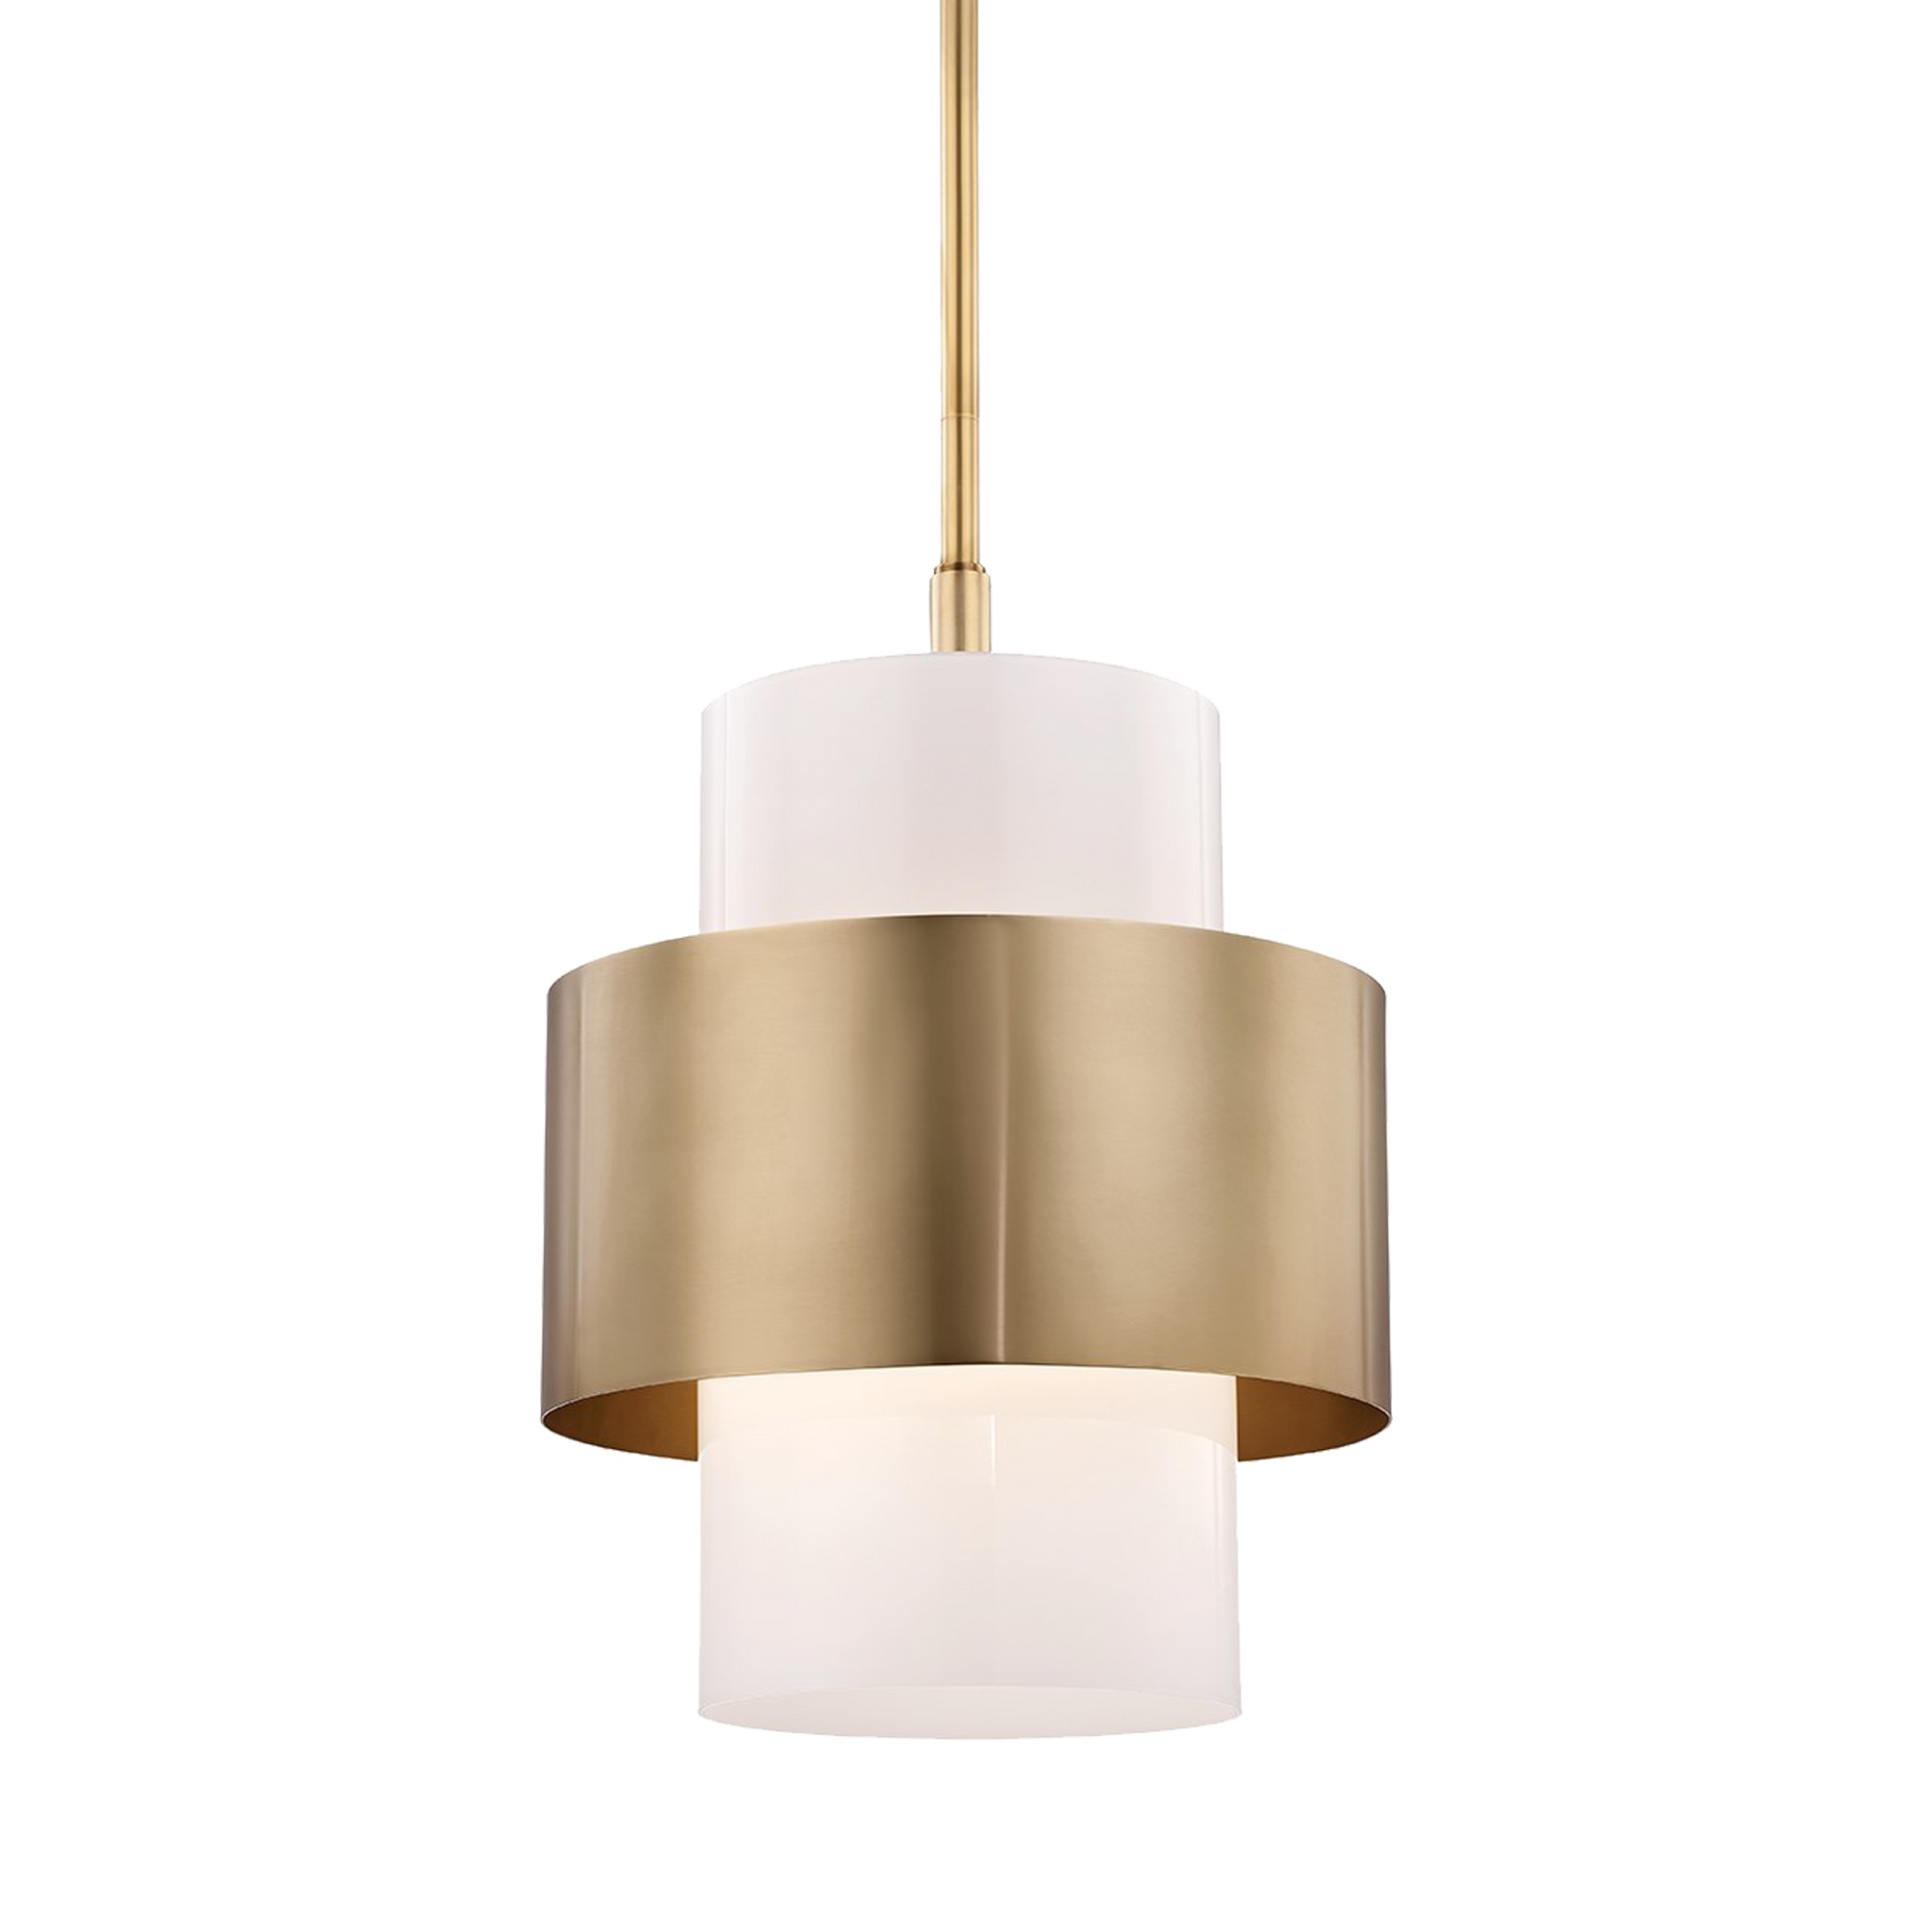 A sleek cylinder diffuser contrasted by an offset metal band, Corinth is an elegant decorative accent.